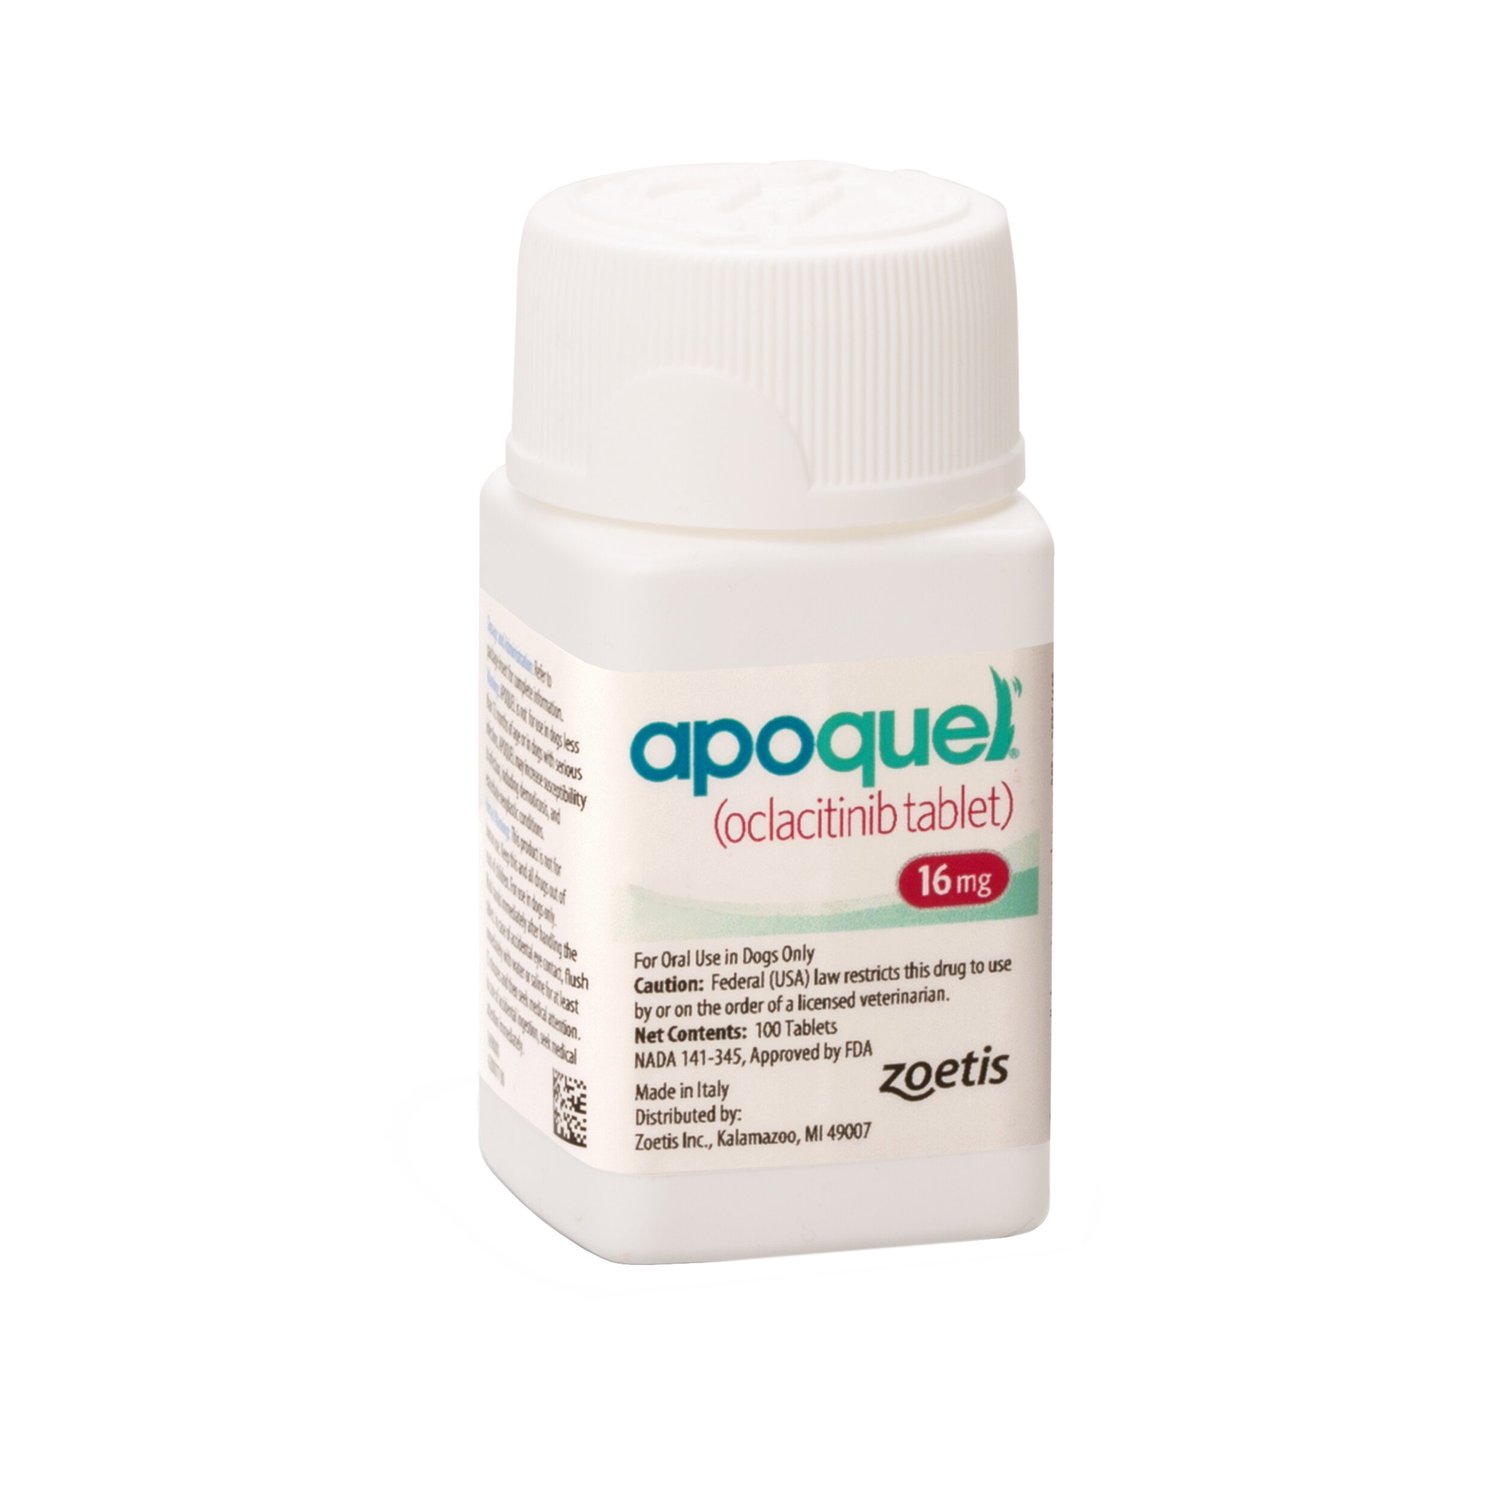 APOQUEL Tablets for Dogs, 16mg, 30 tablets